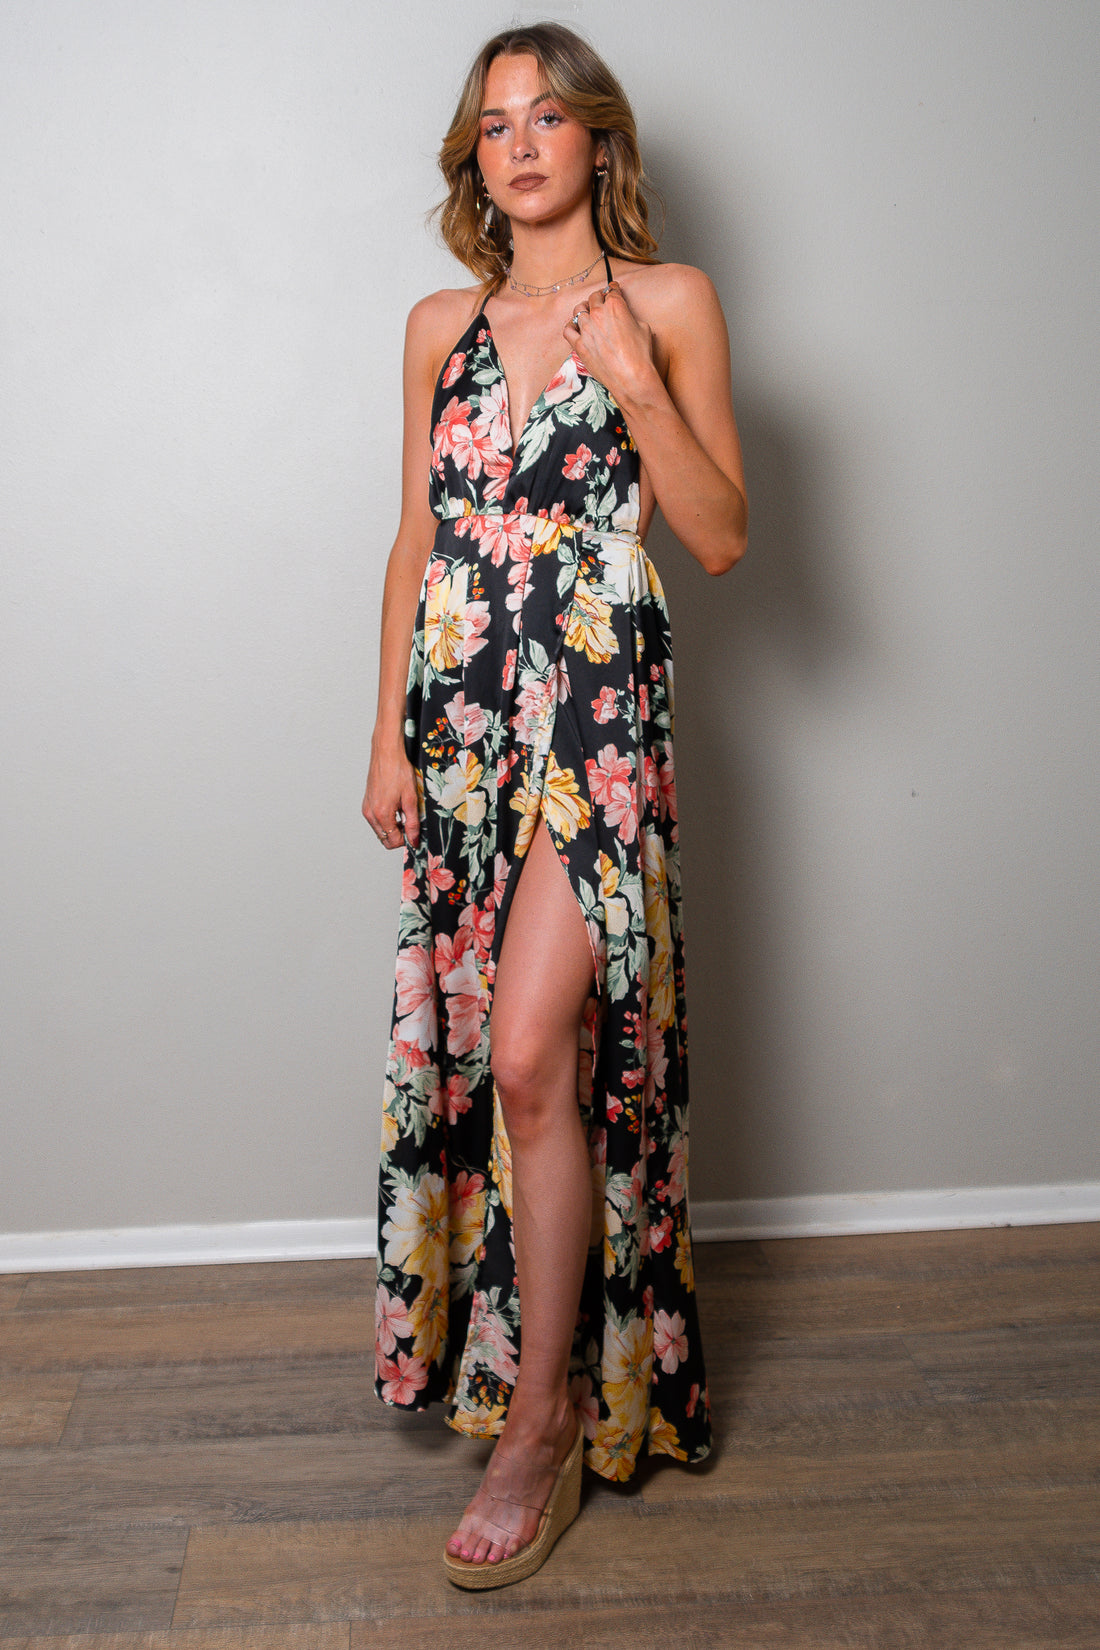 Flower Me With Love Floral Maxi Dress